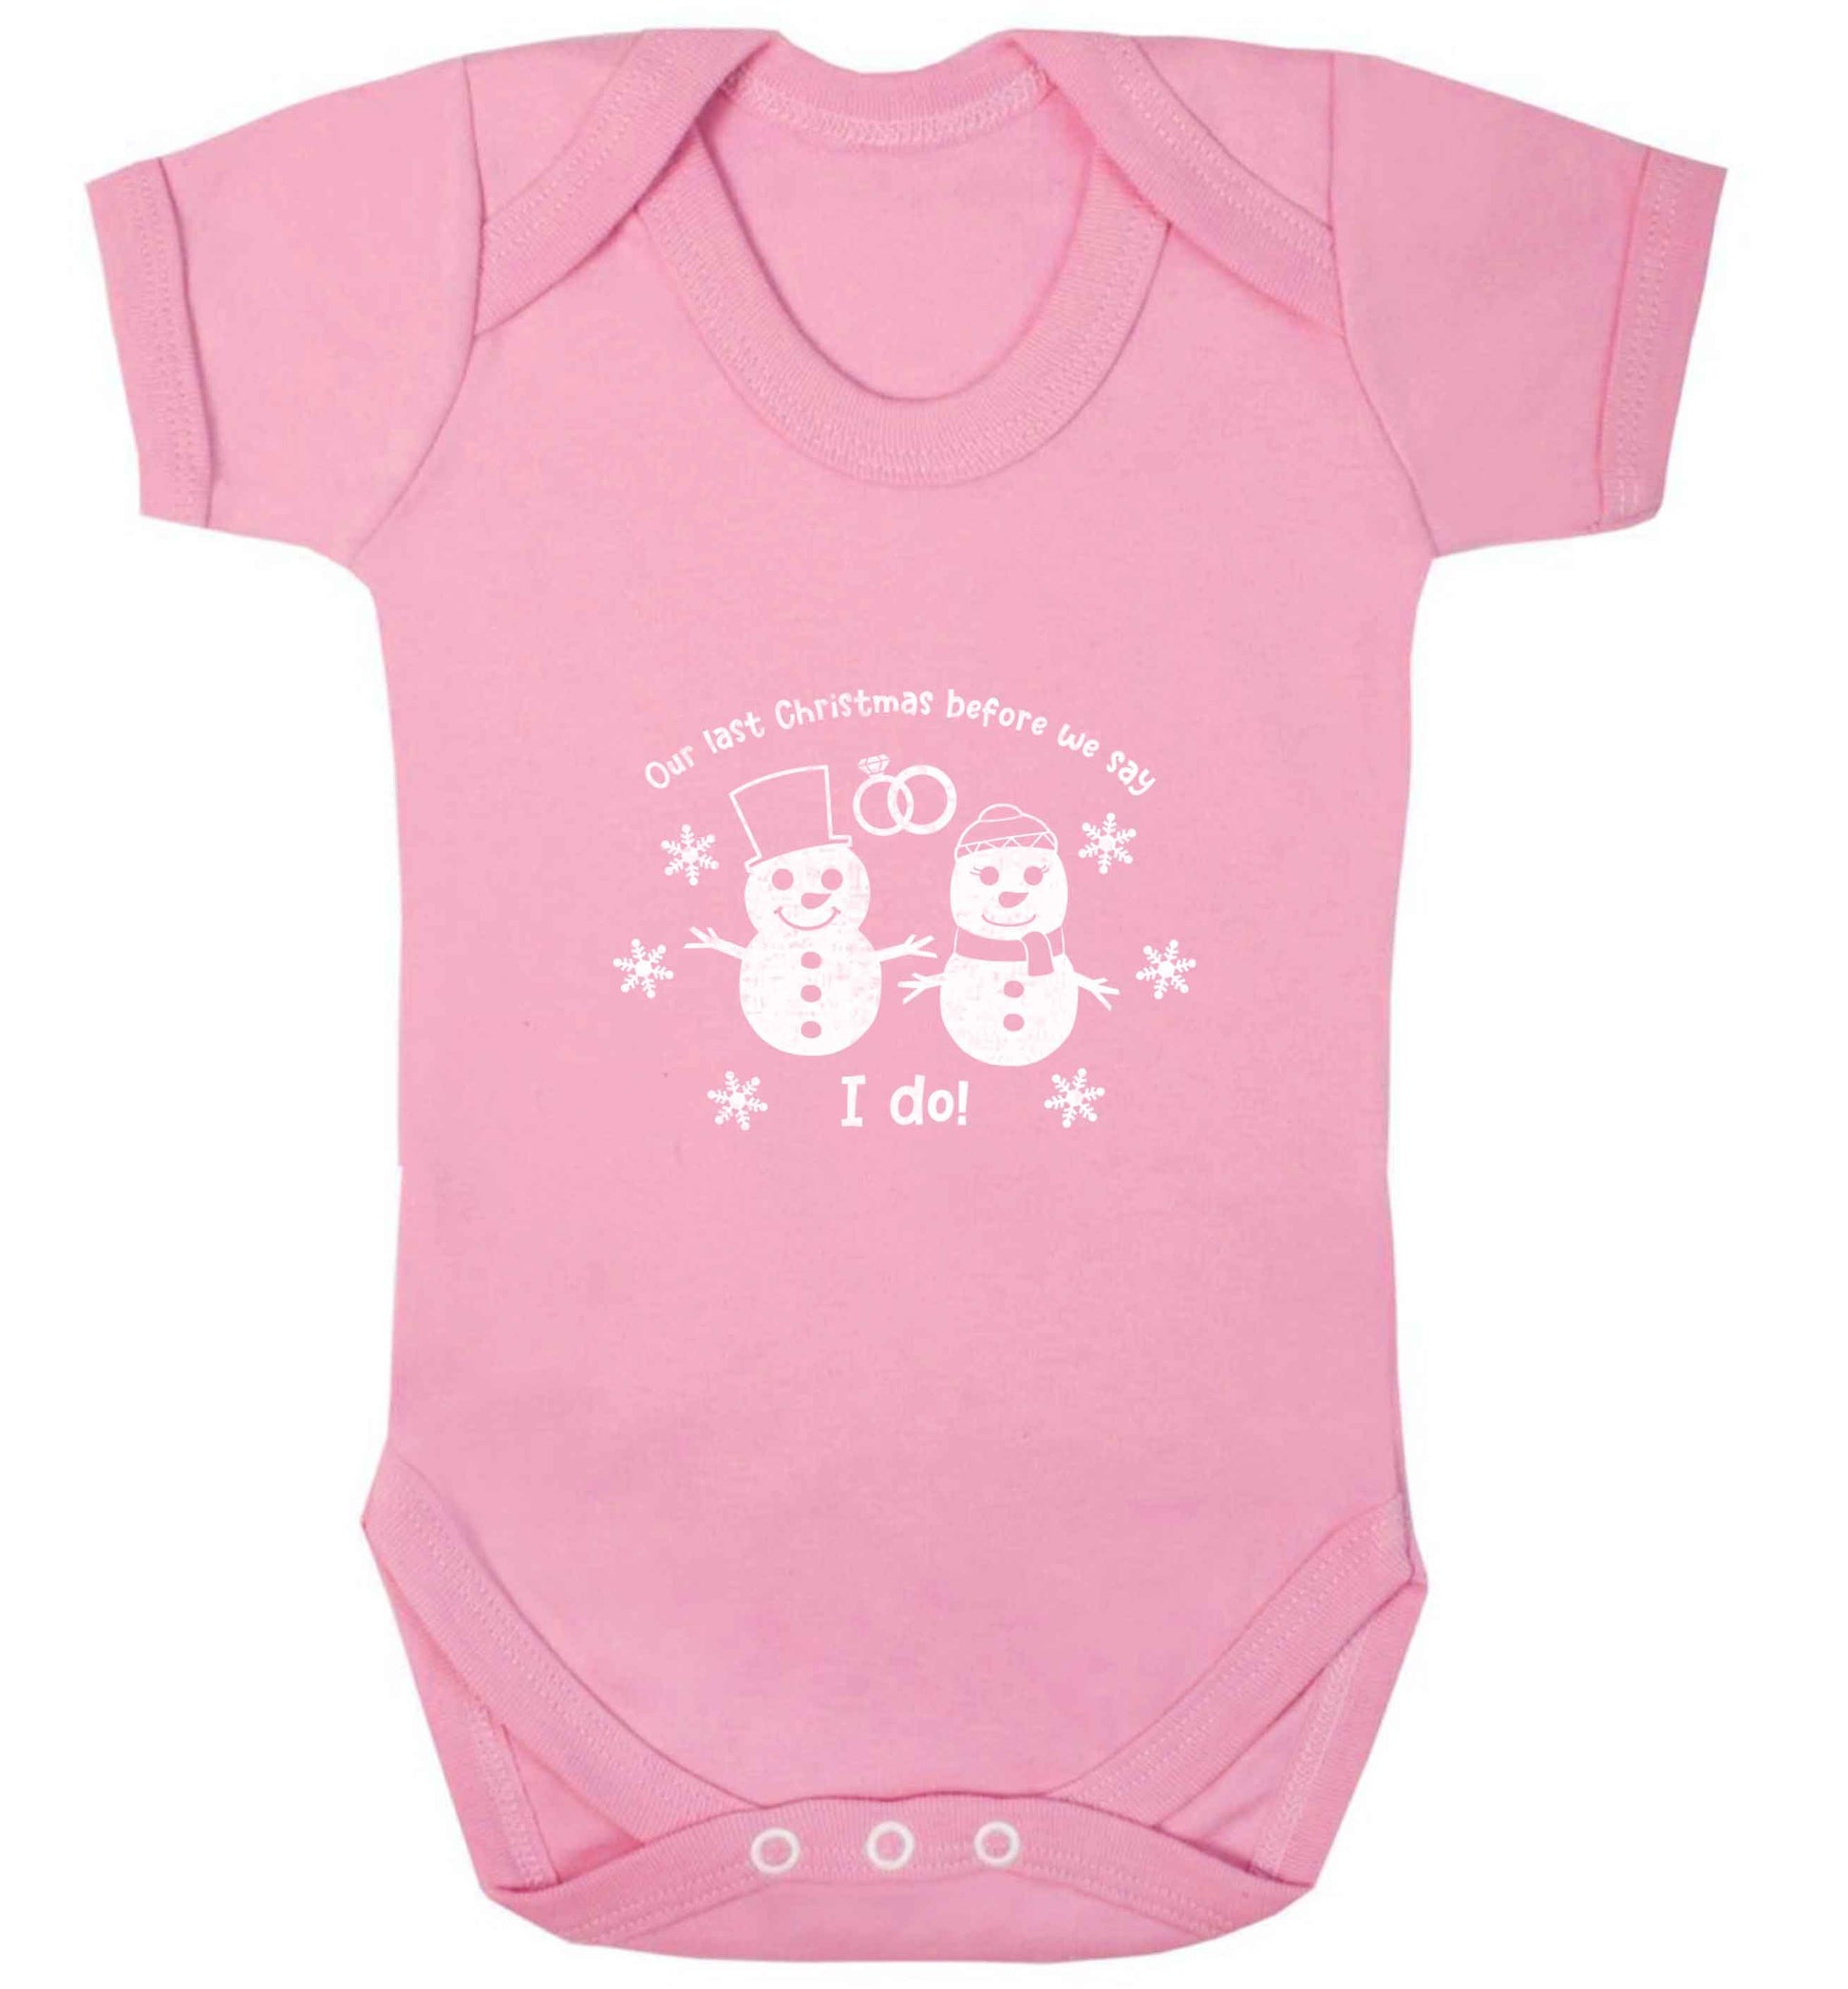 Last Christmas before we say I do baby vest pale pink 18-24 months